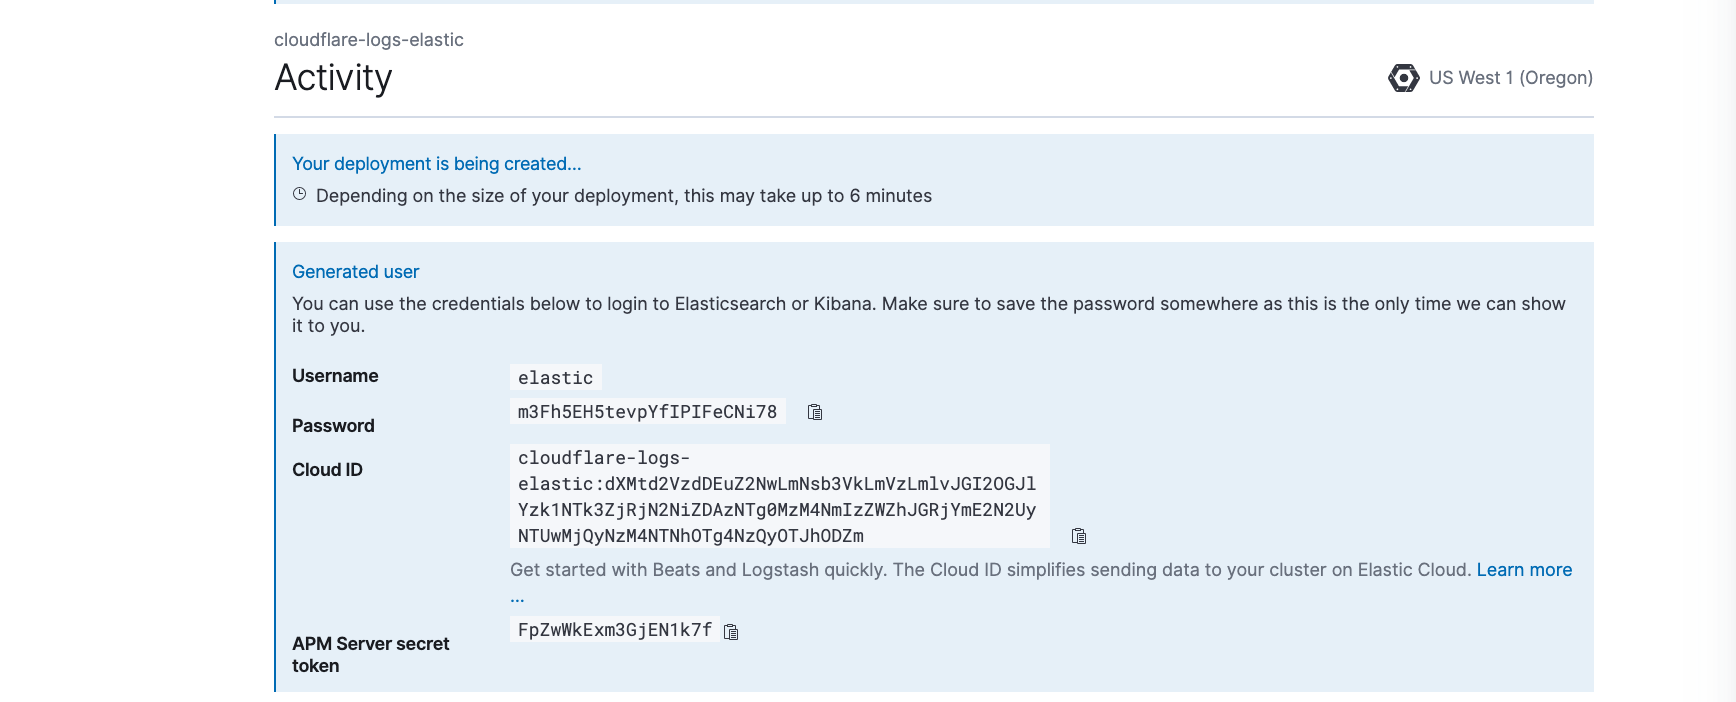 Details of the user created: username, password, Cloud ID and APM Server secret token